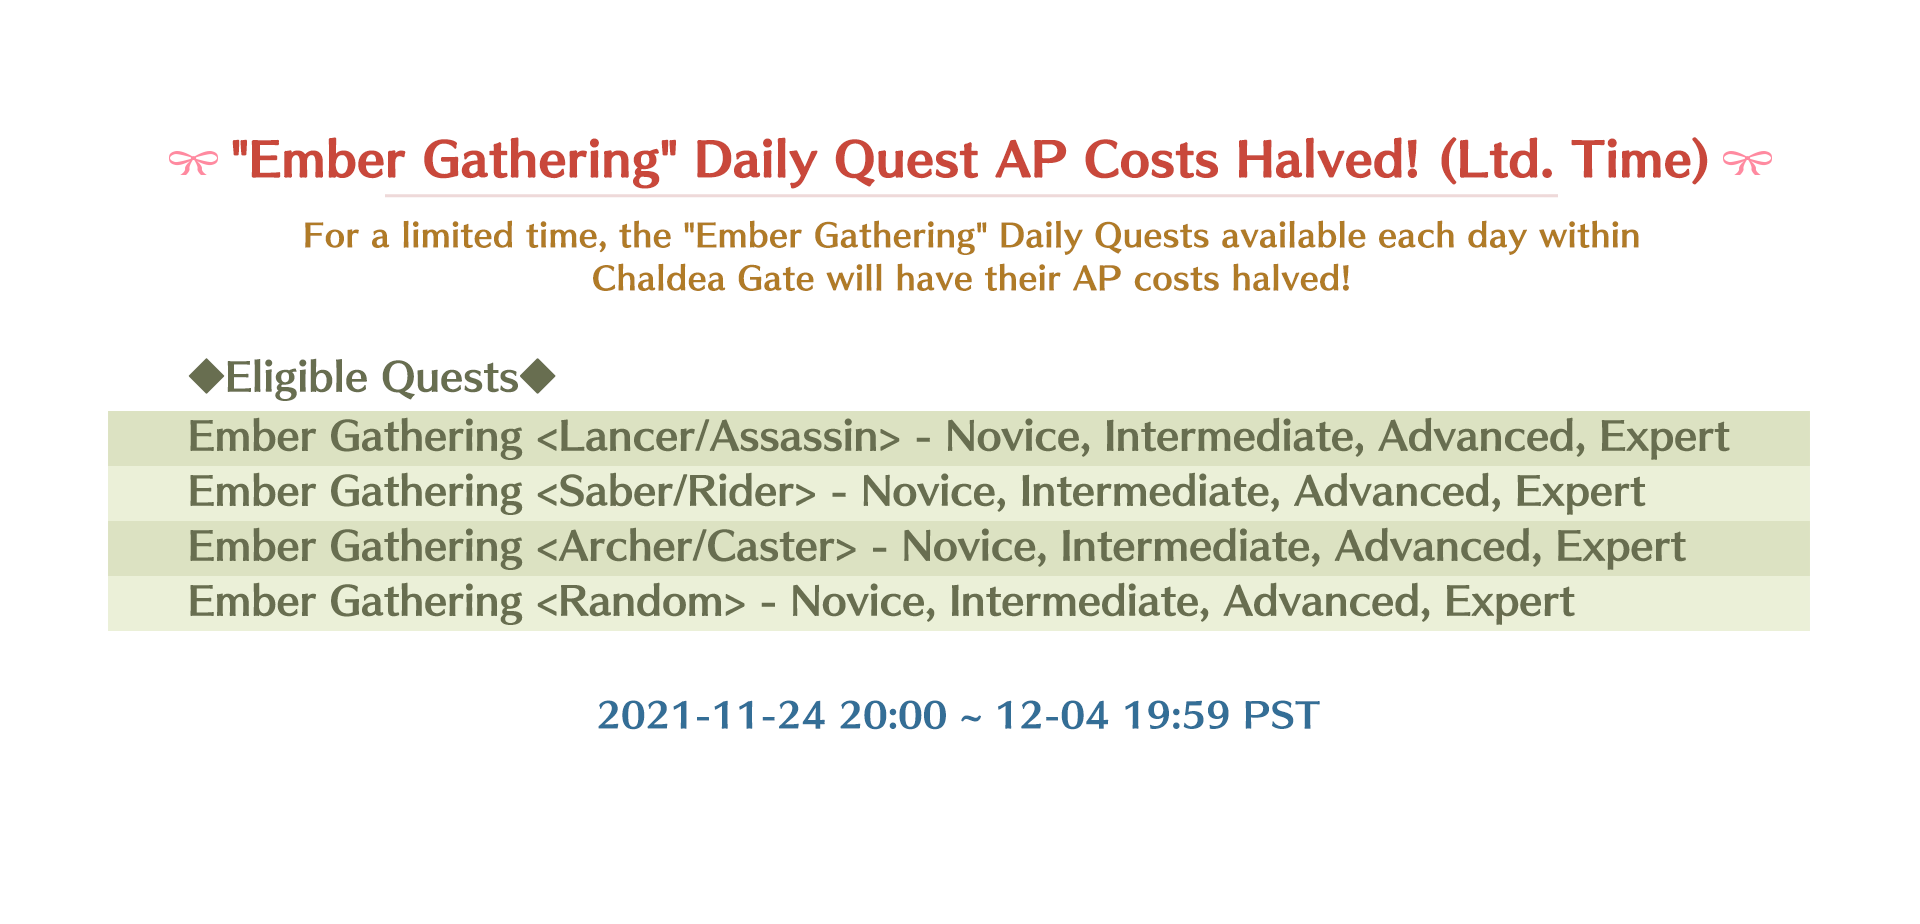 Ember Gathering Daily Quest AP Cost Halved! (Ltd. Time)